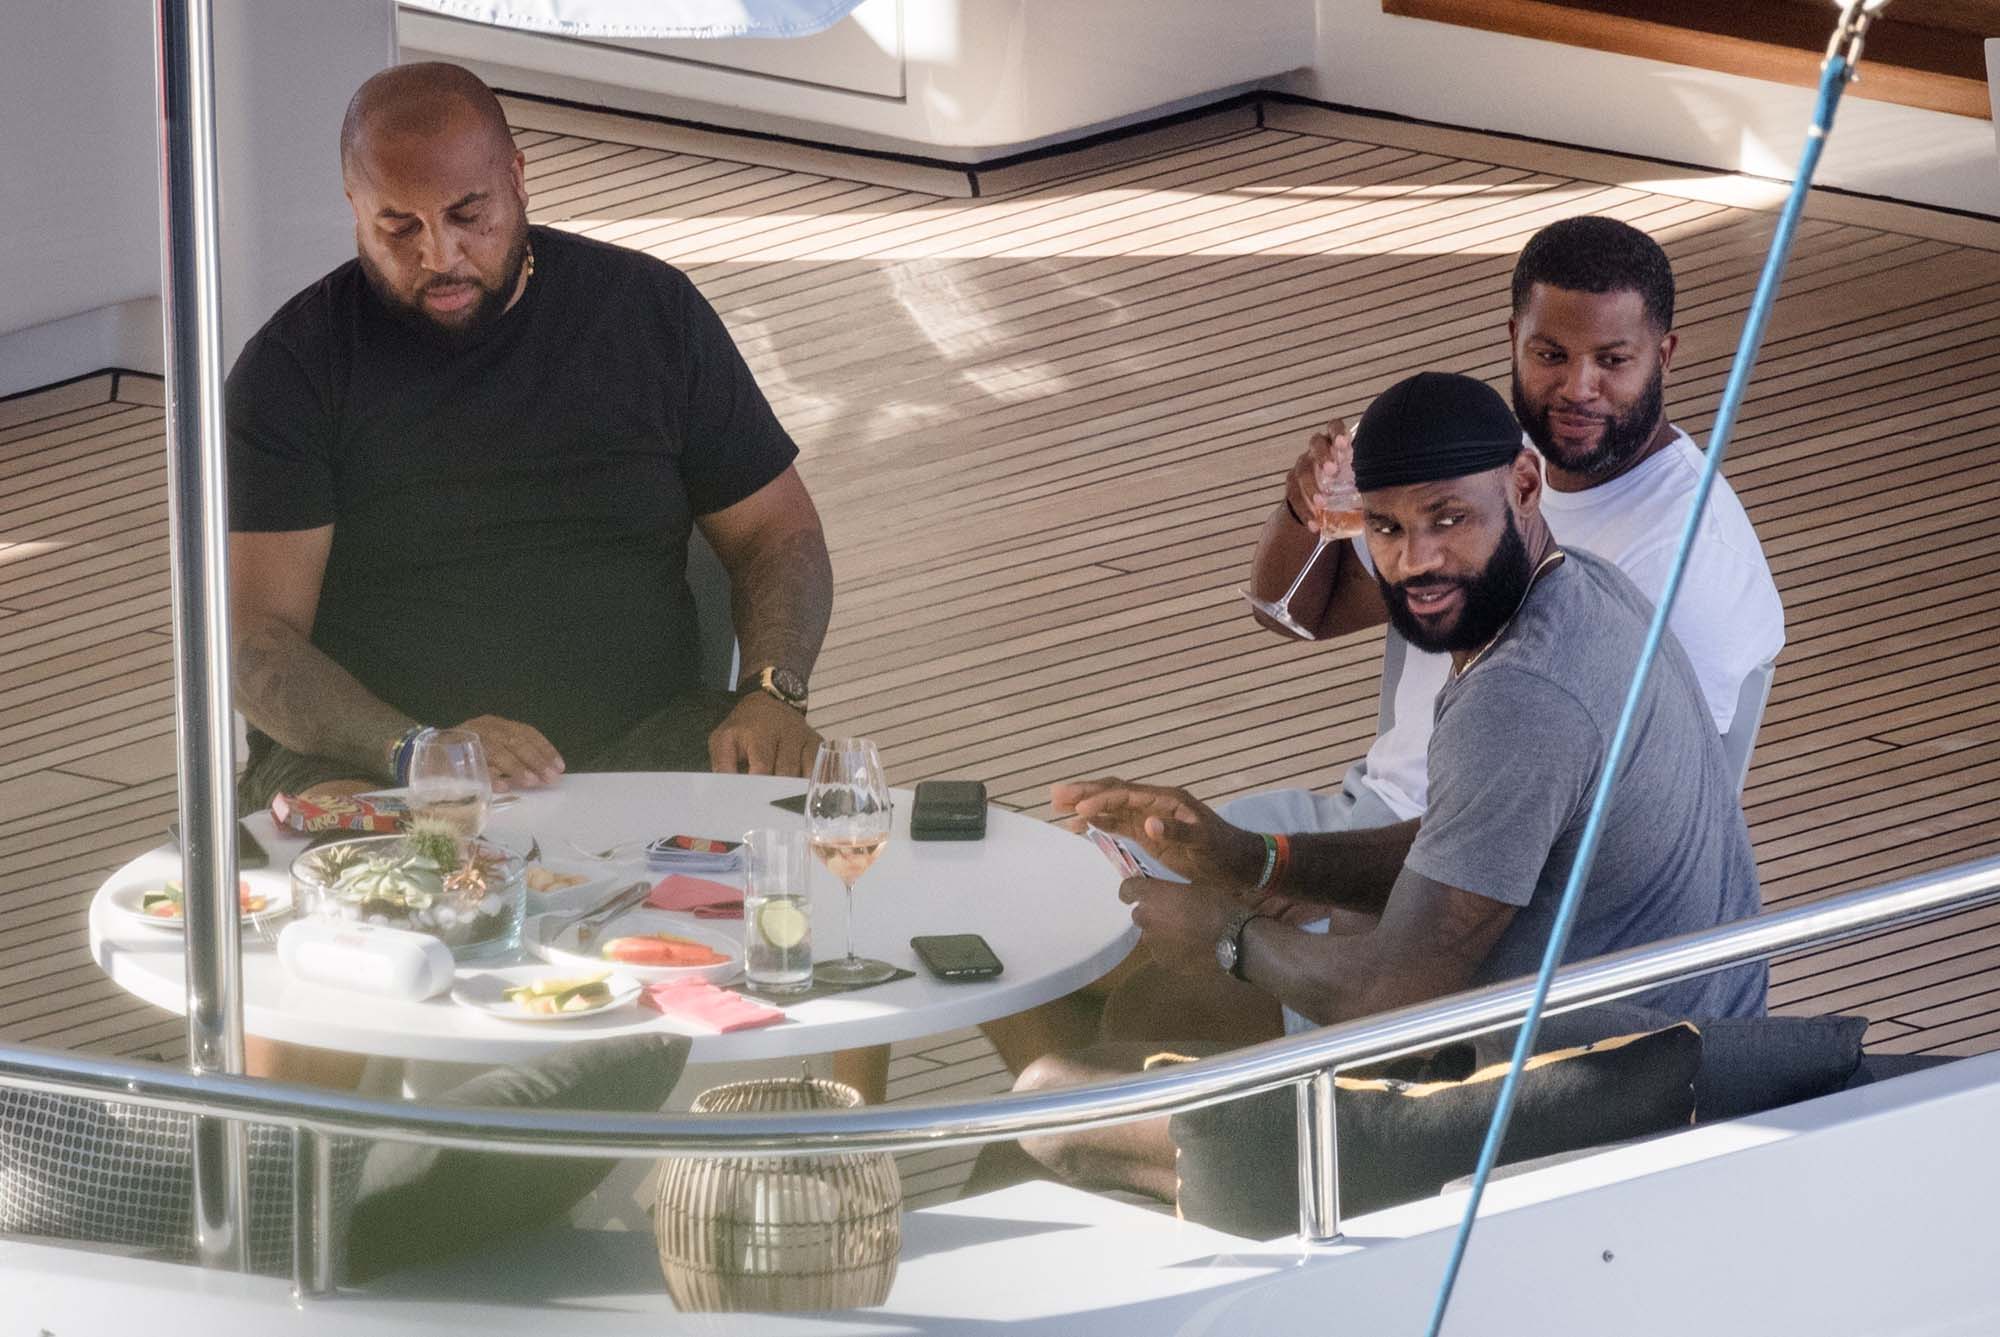 LeBron James plays UNO with friends on a yacht.